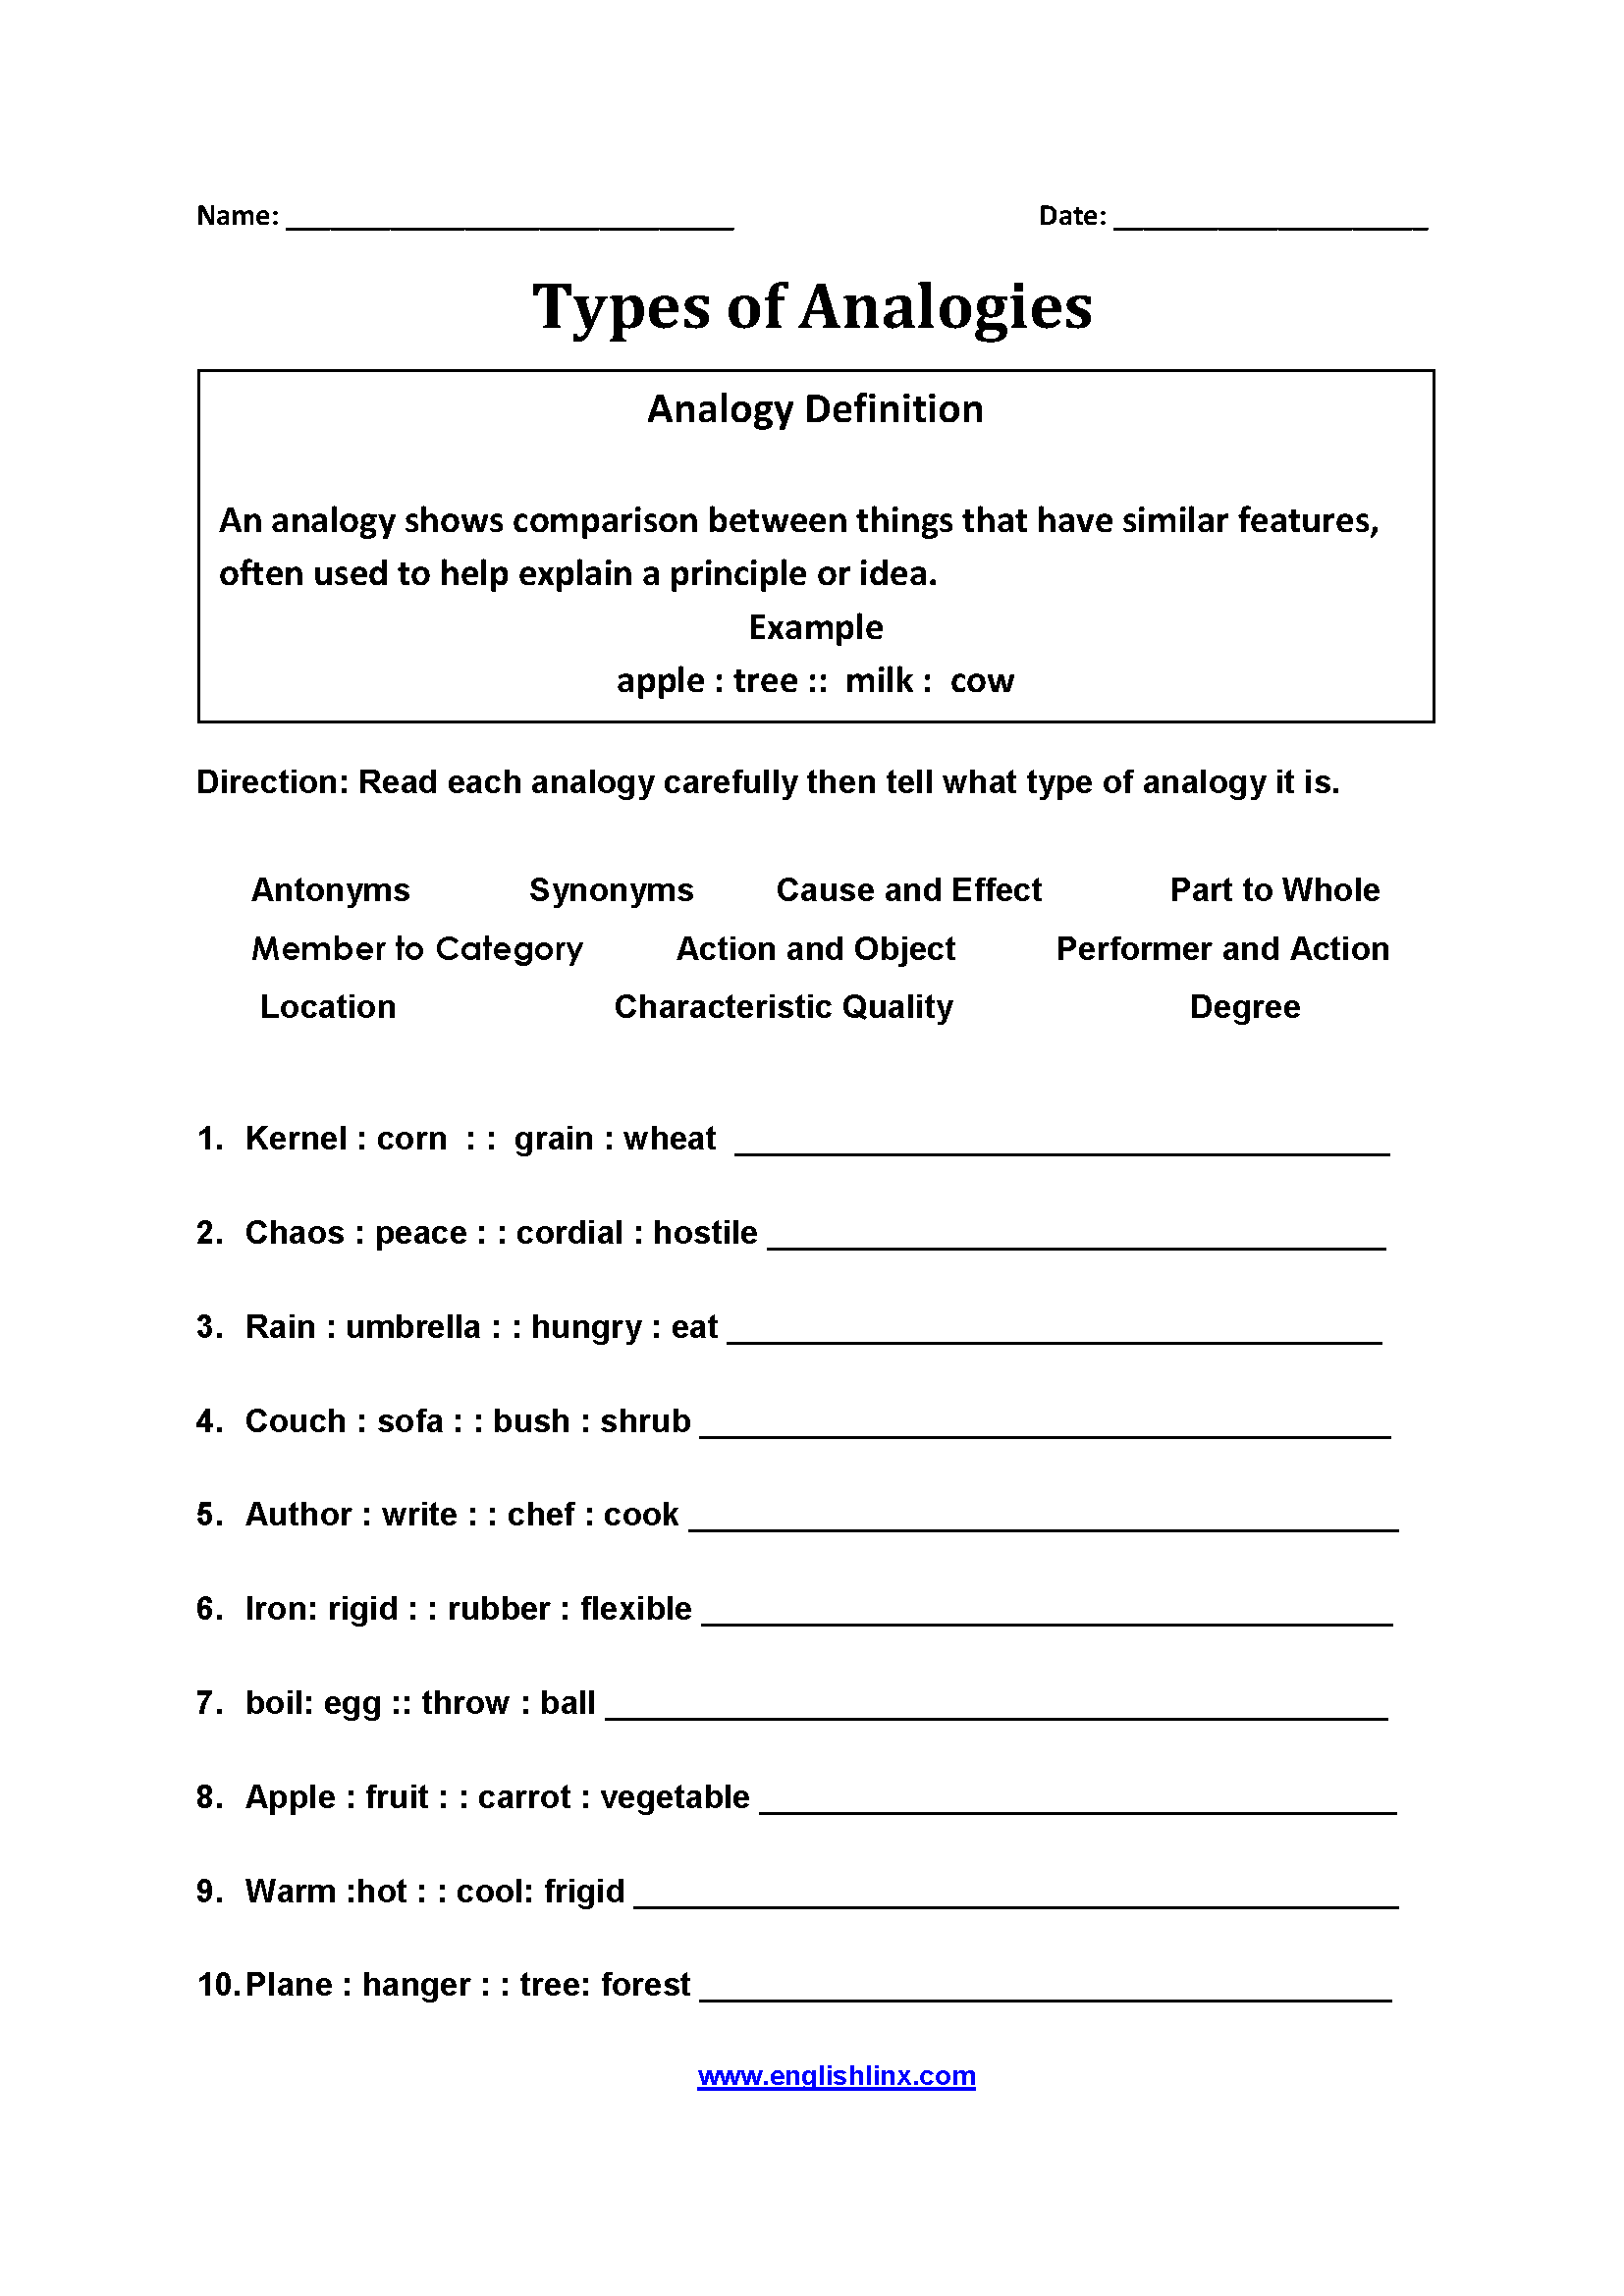 Types of Analogy Worksheets